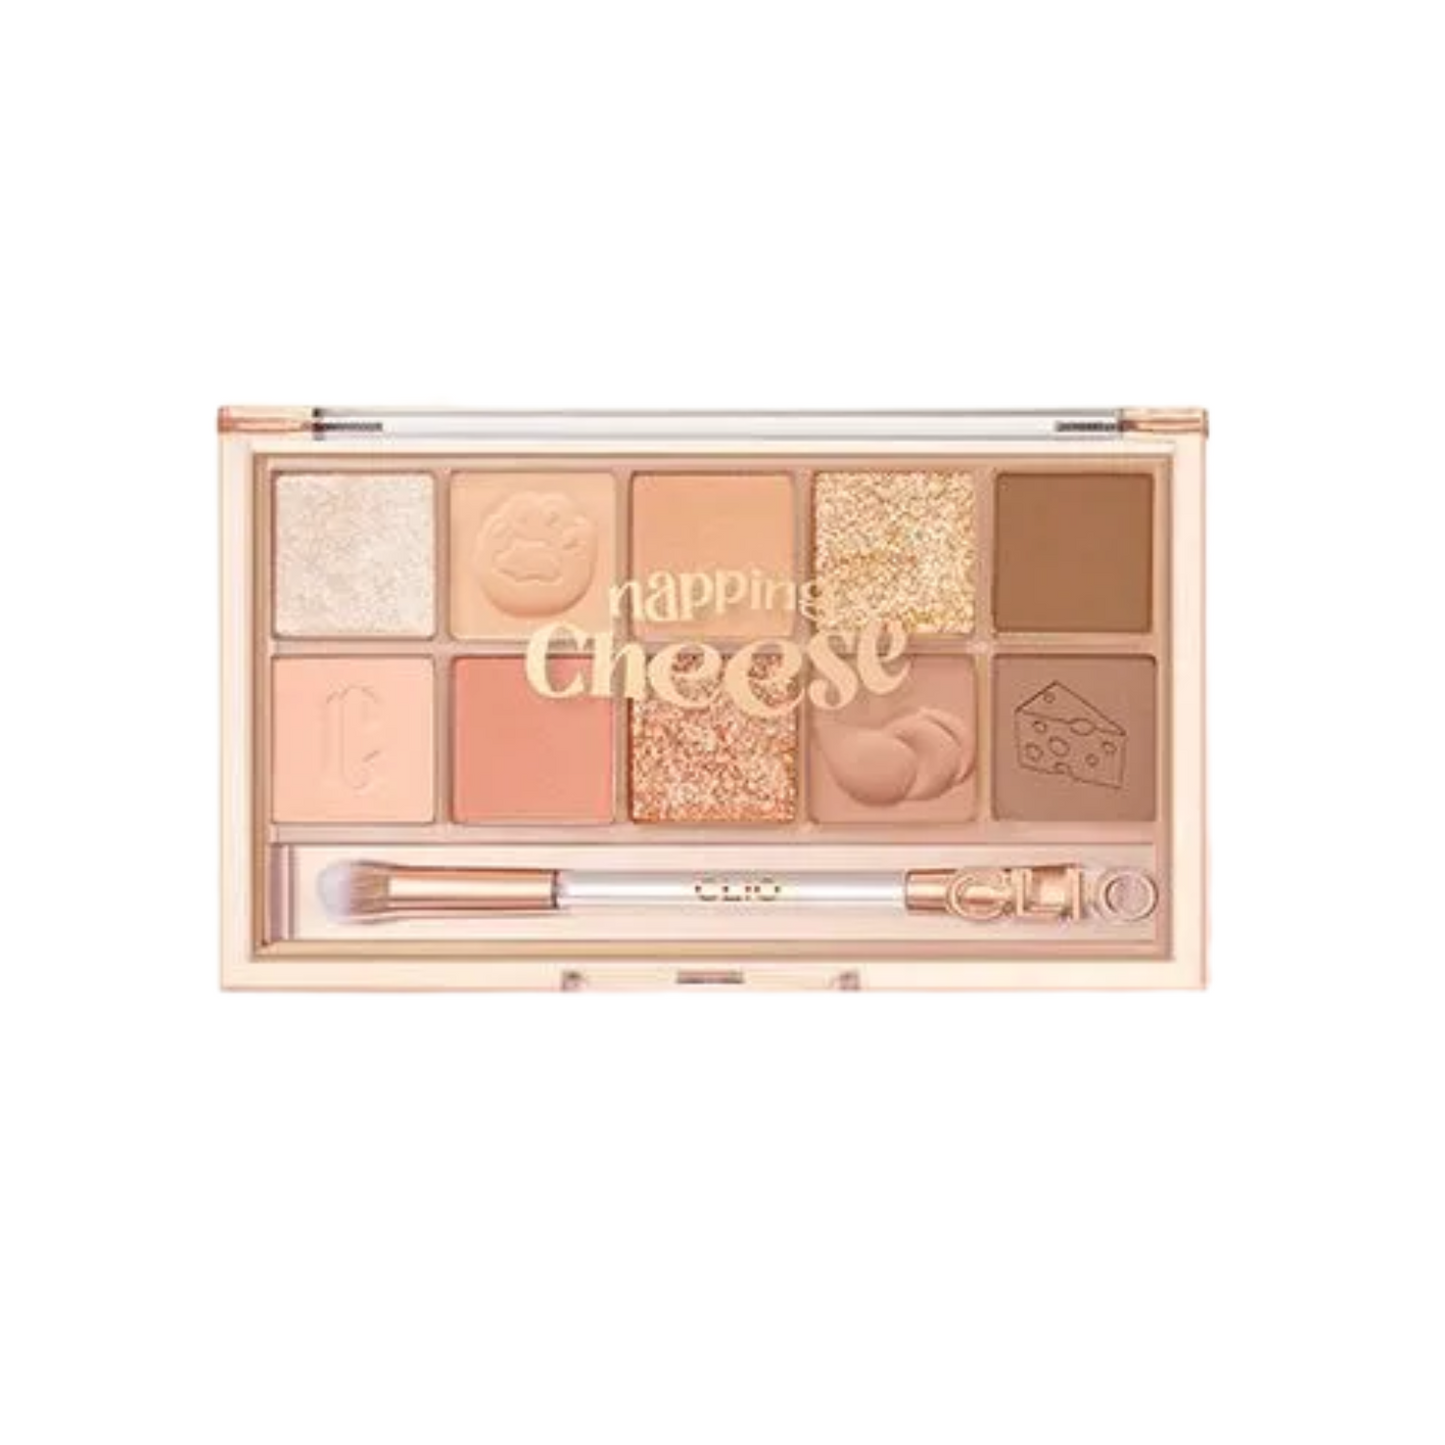 CLIO Pro Eye Palette Koshort In Seoul Limited Edition (2 Colors)